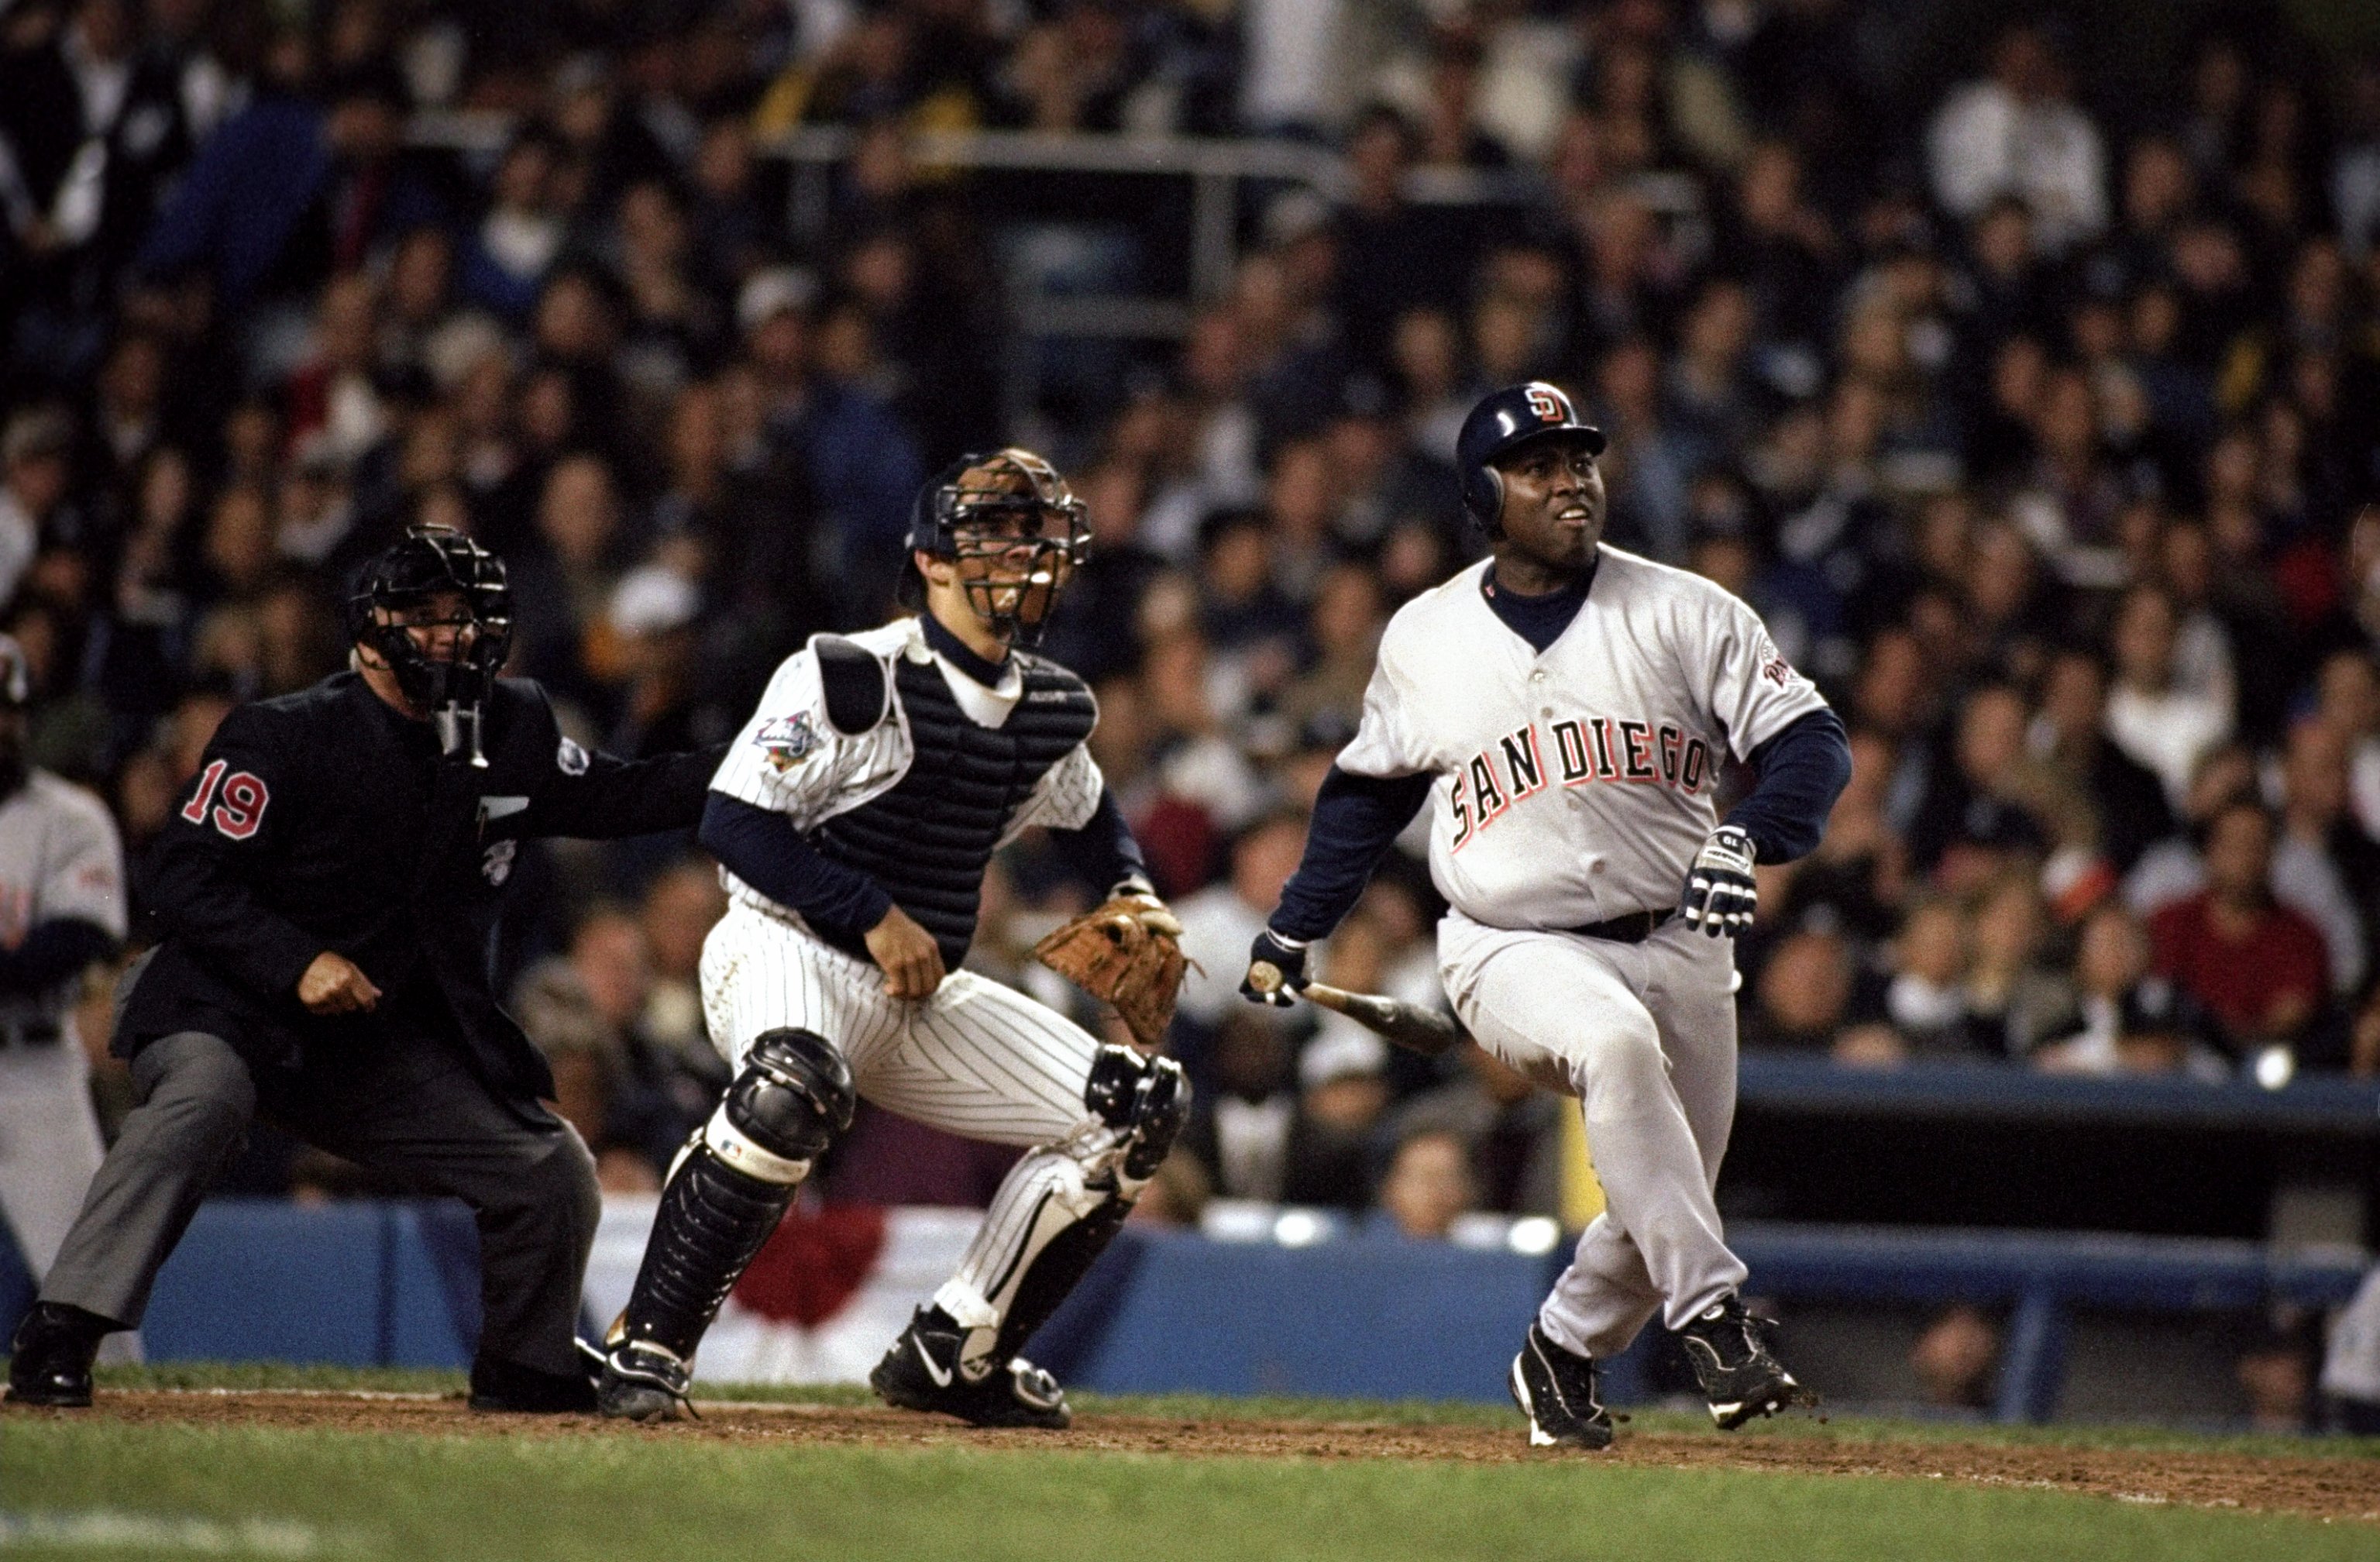 San Diego Padres, History & Notable Players